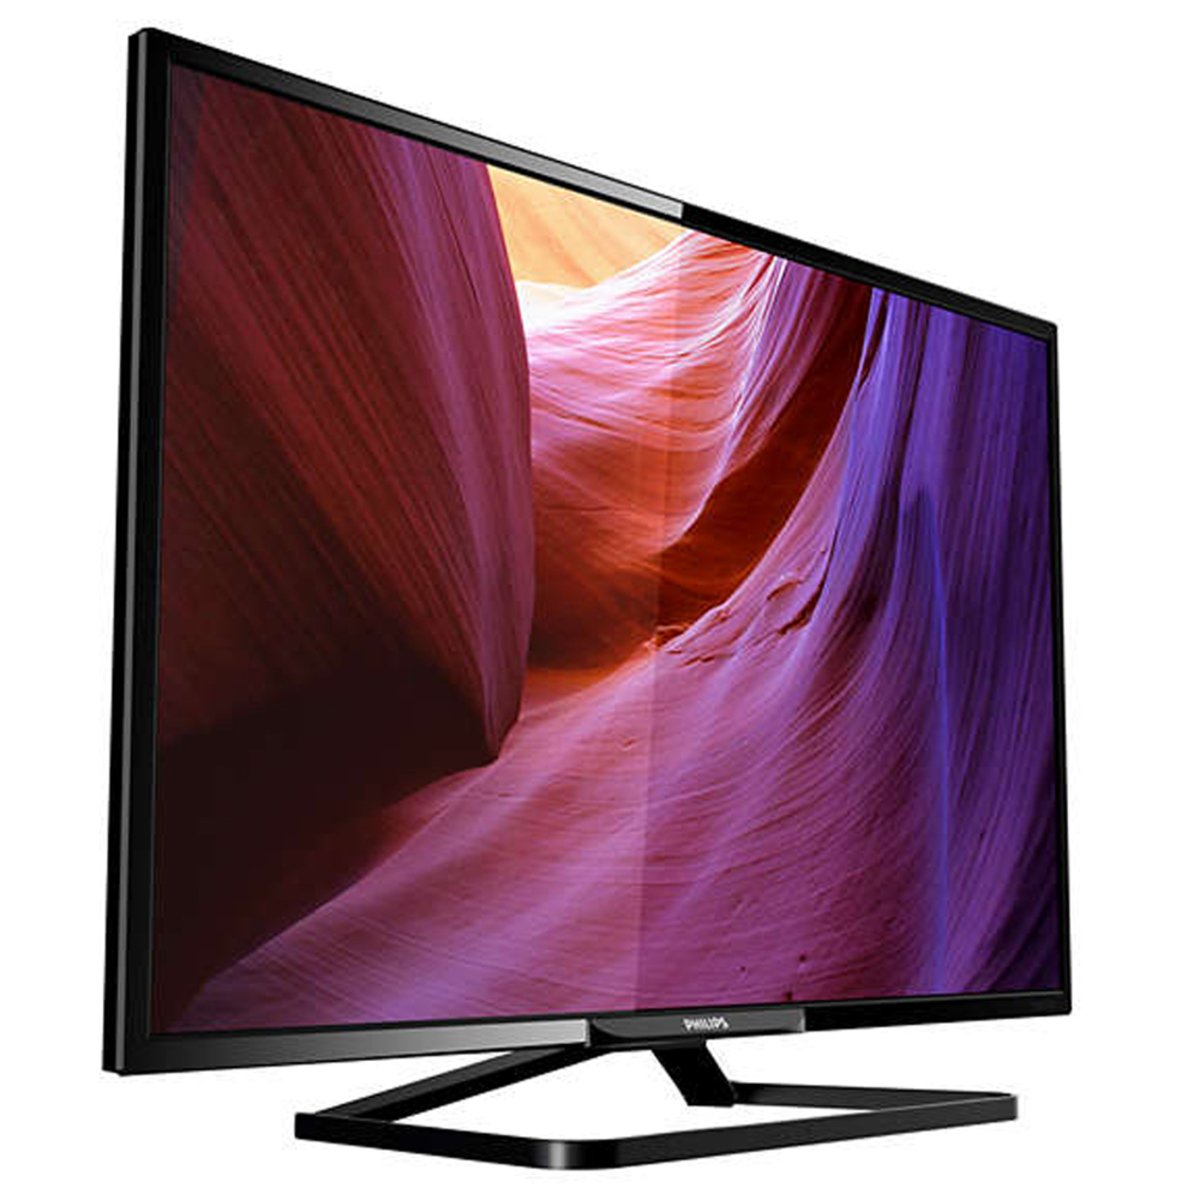 Philips LED TV 32PHT5200 32inch